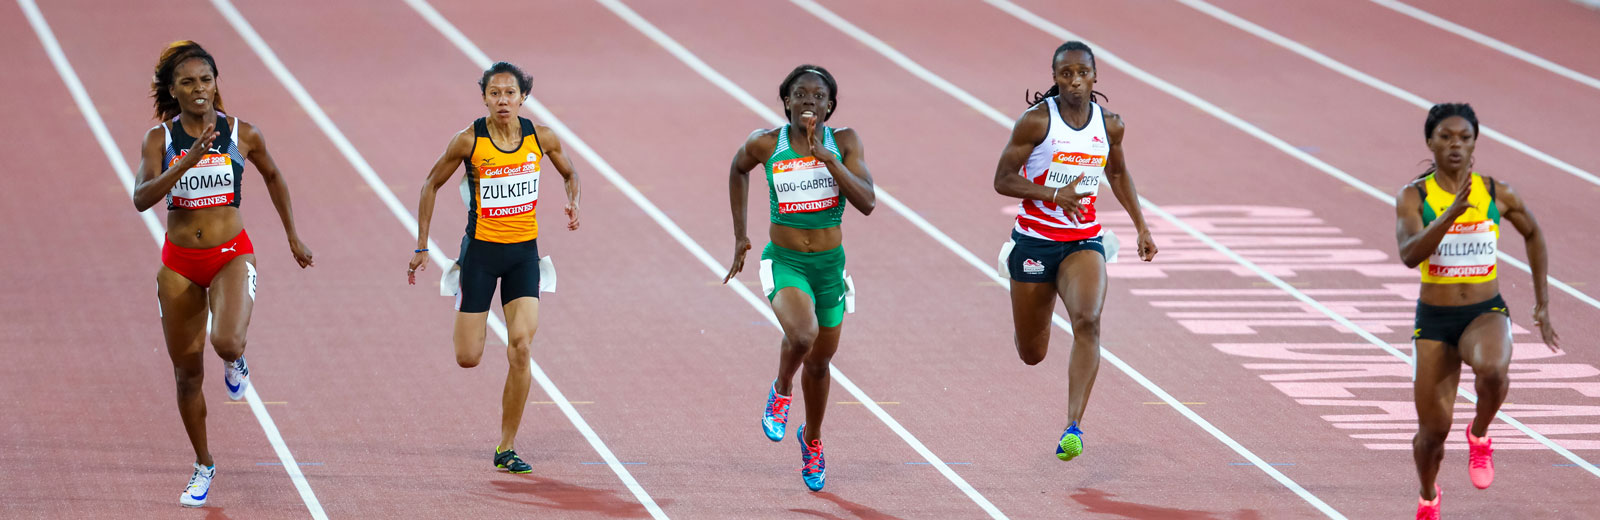 Athletic's women's 100m heats during the 2018 Gold Coast Commonwealth Games at the Carrara Stadium.